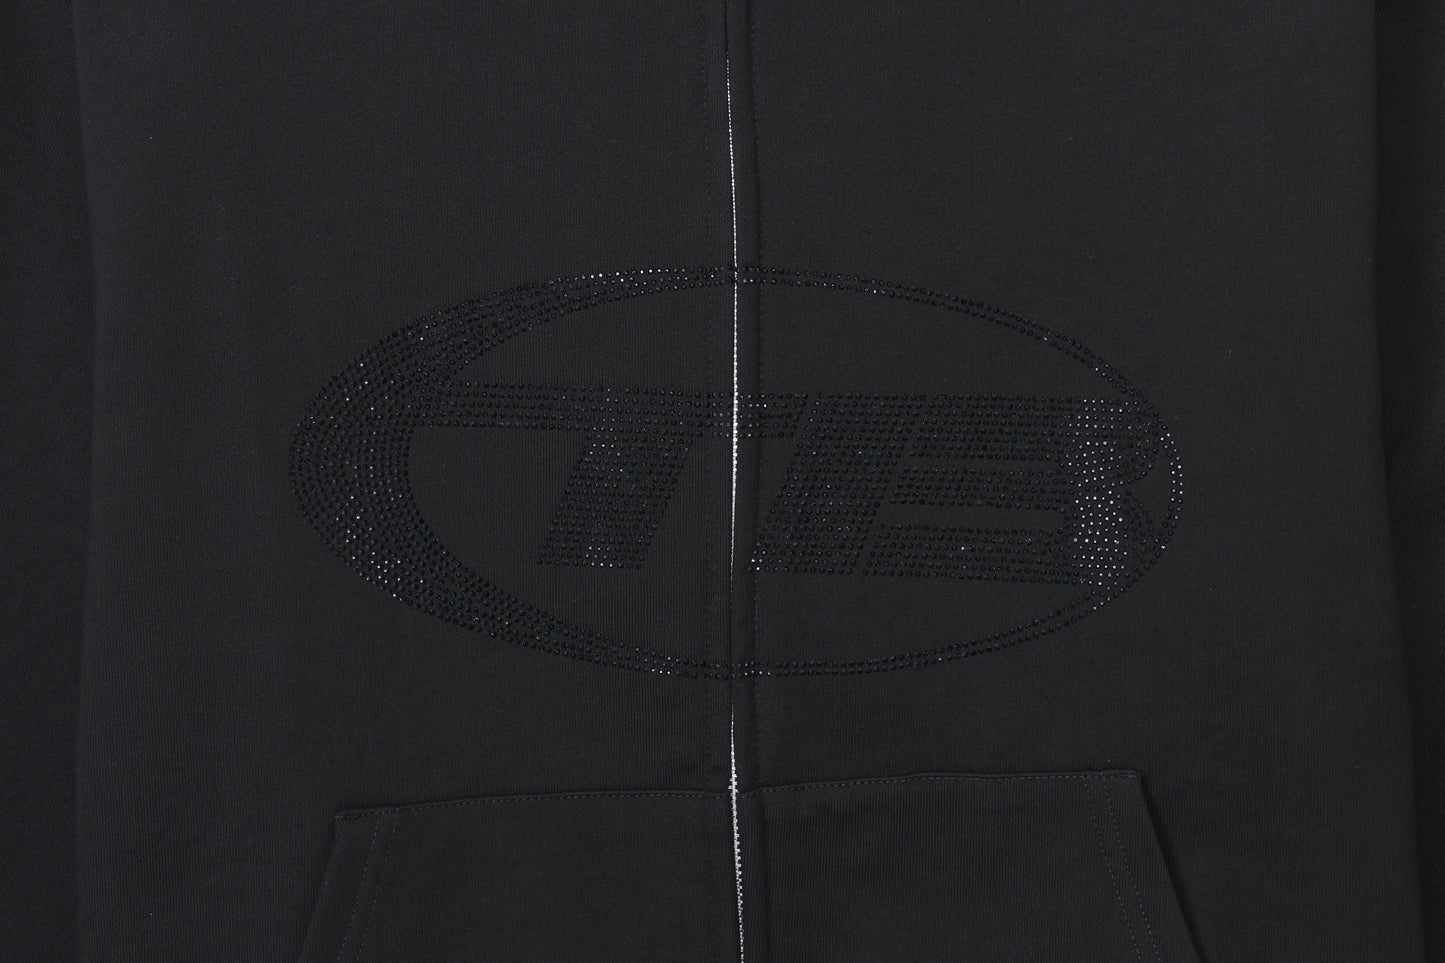 【Re'verth 10th Anniversary Limited Item】Bling Bling Hoodie